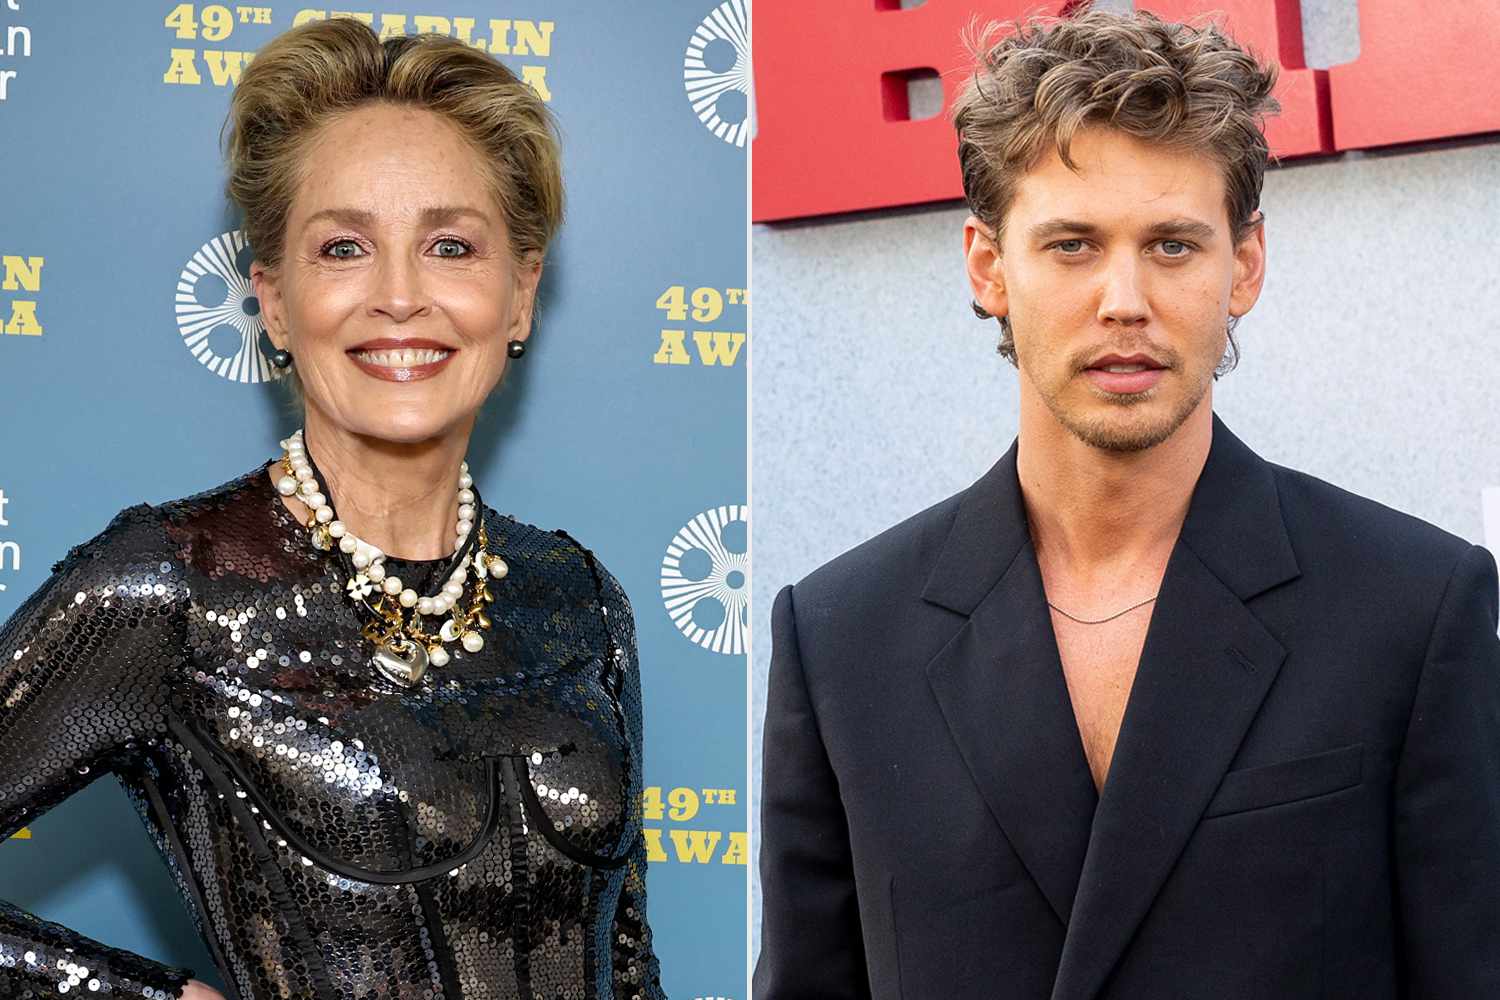 Sharon Stone and Austin Butler Explain Their 'Special Connection': 'I Really Believe in Him'